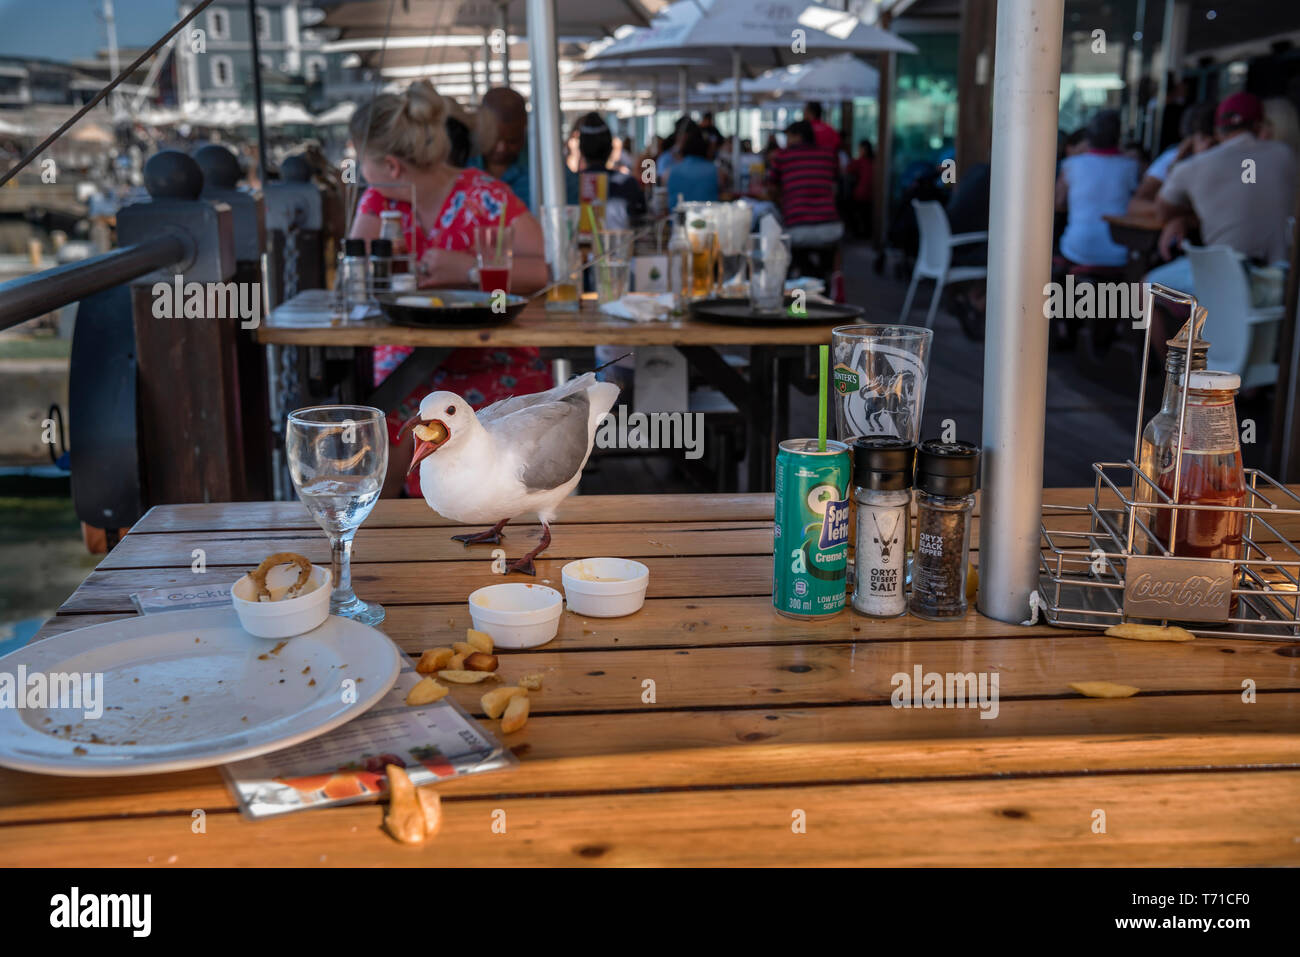 A gull stealing chips from a plate in a busy restaurant Stock Photo